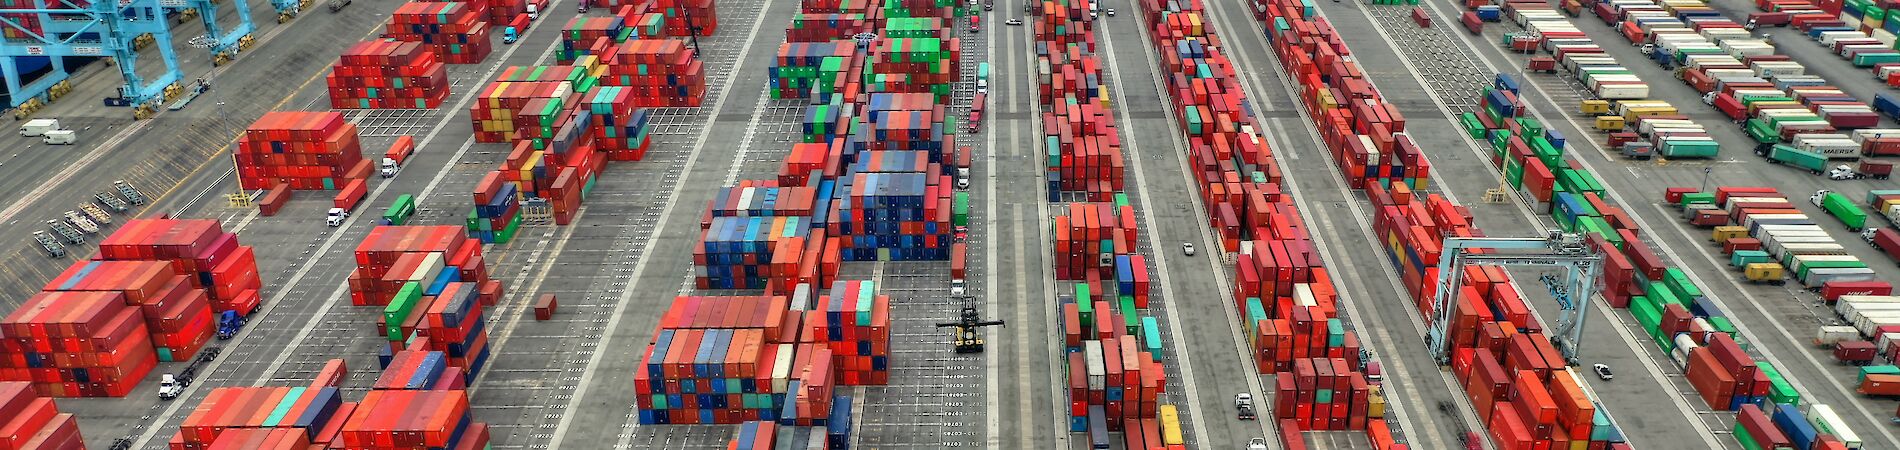 Large number of shipping containers in loading area